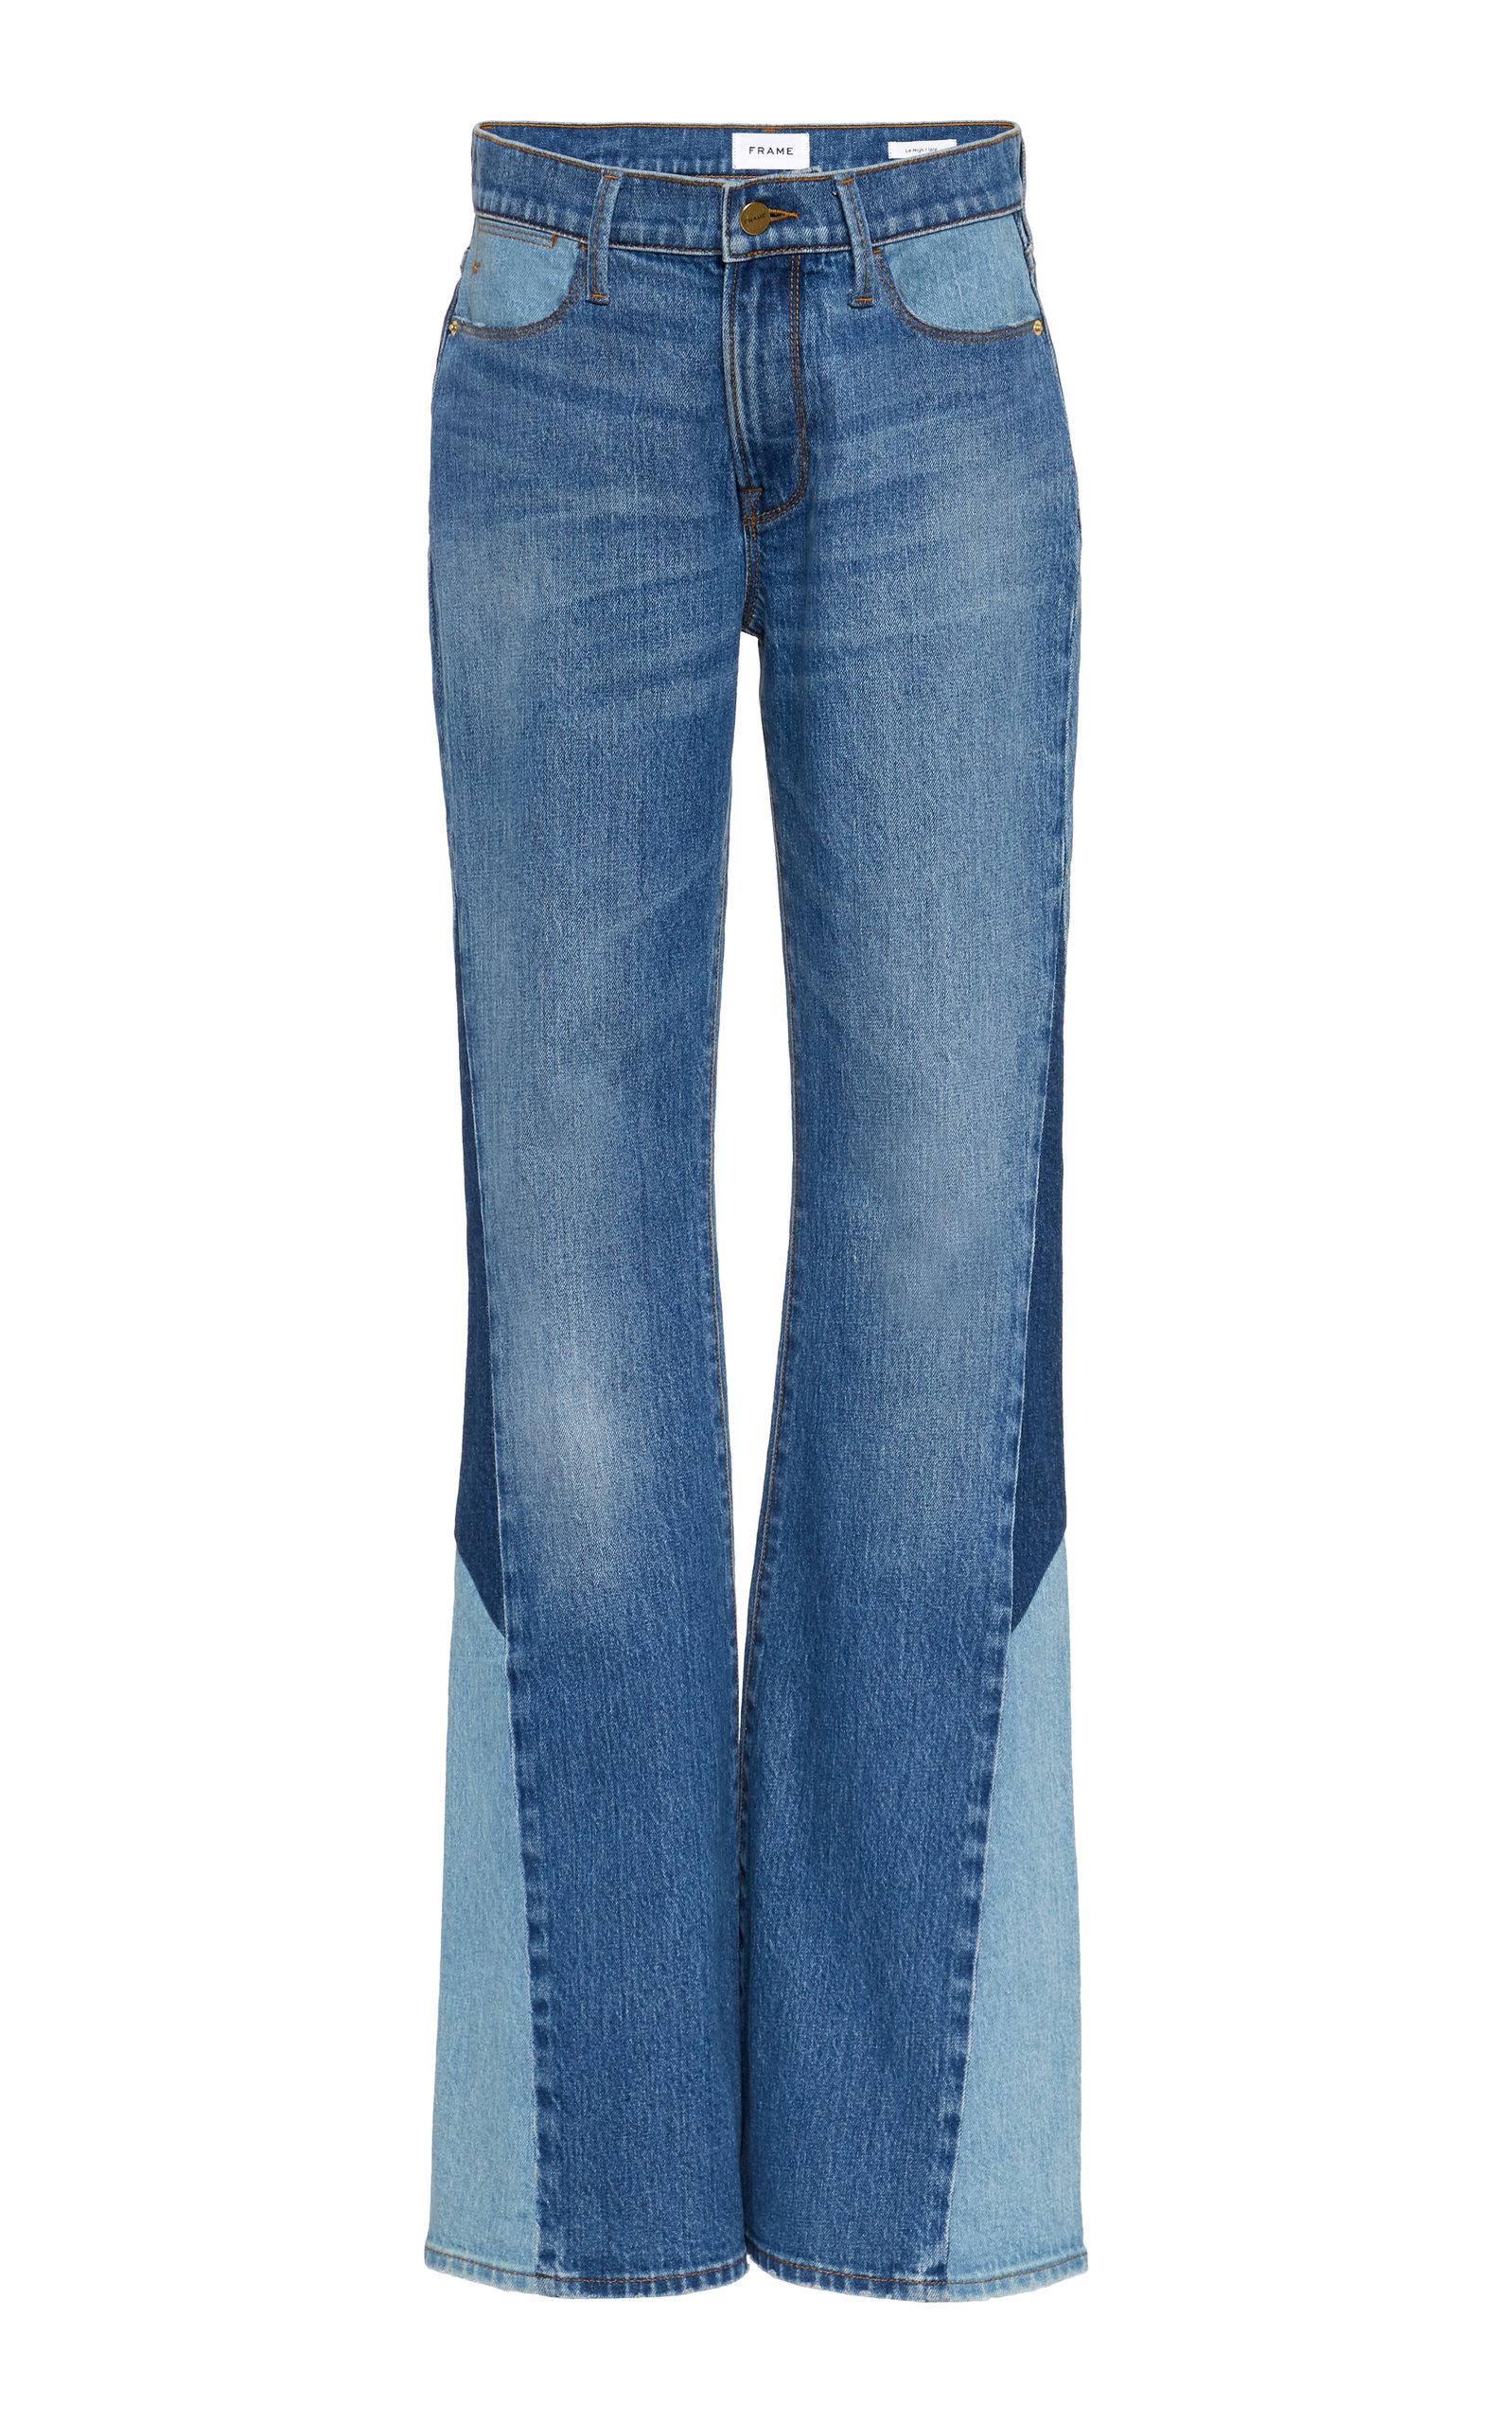 FRAME Denim Le High Patchwork Flared Jeans in Blue - Lyst